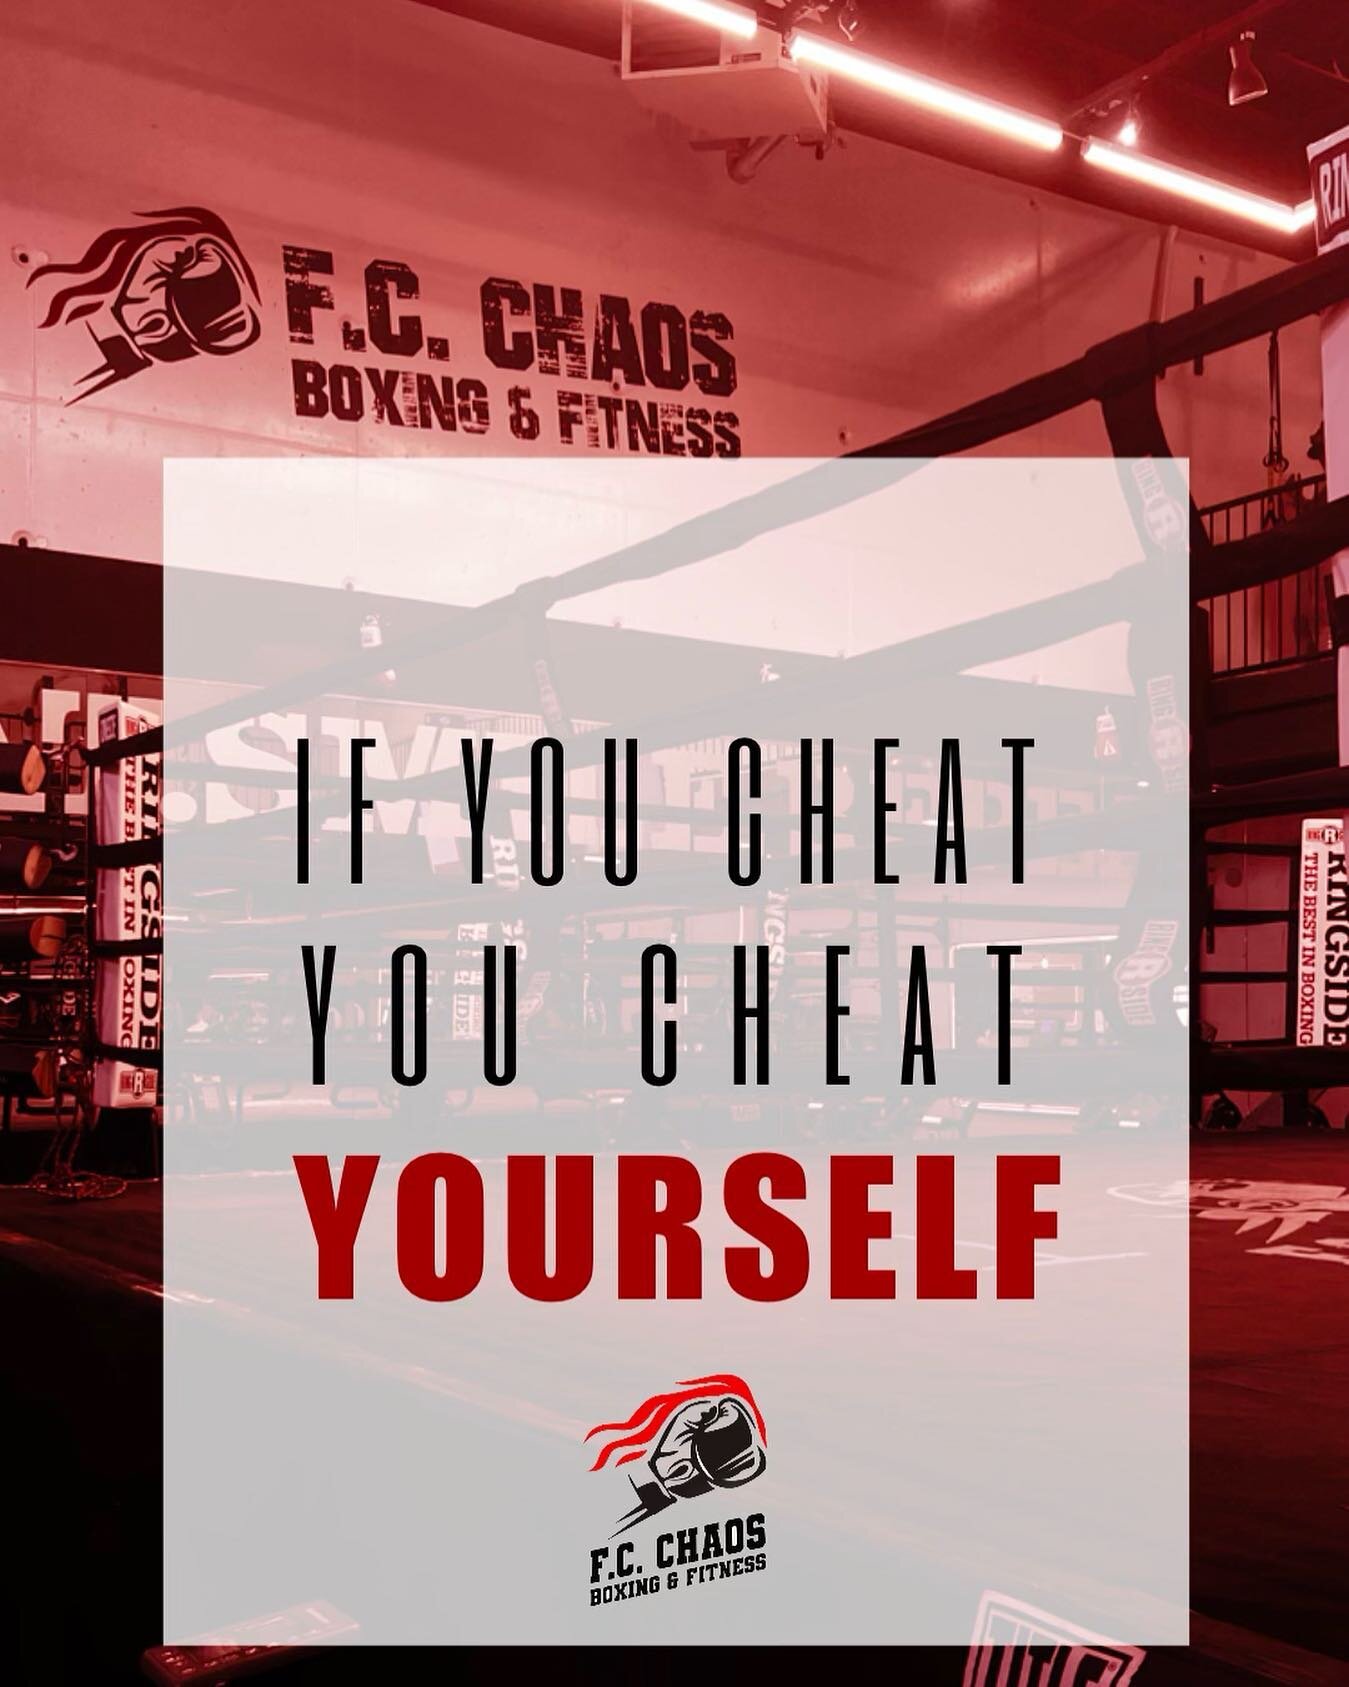 Time to get after it! 😤
&bull;
&bull;
&bull;
#saturday #weekendworkout #fcchaos #community #club #join #gym #fitnesscenter #boxingring #personaltrainer #nyc #instagood #riseandgrind #believe #workhard #noquitting #dailymotivation